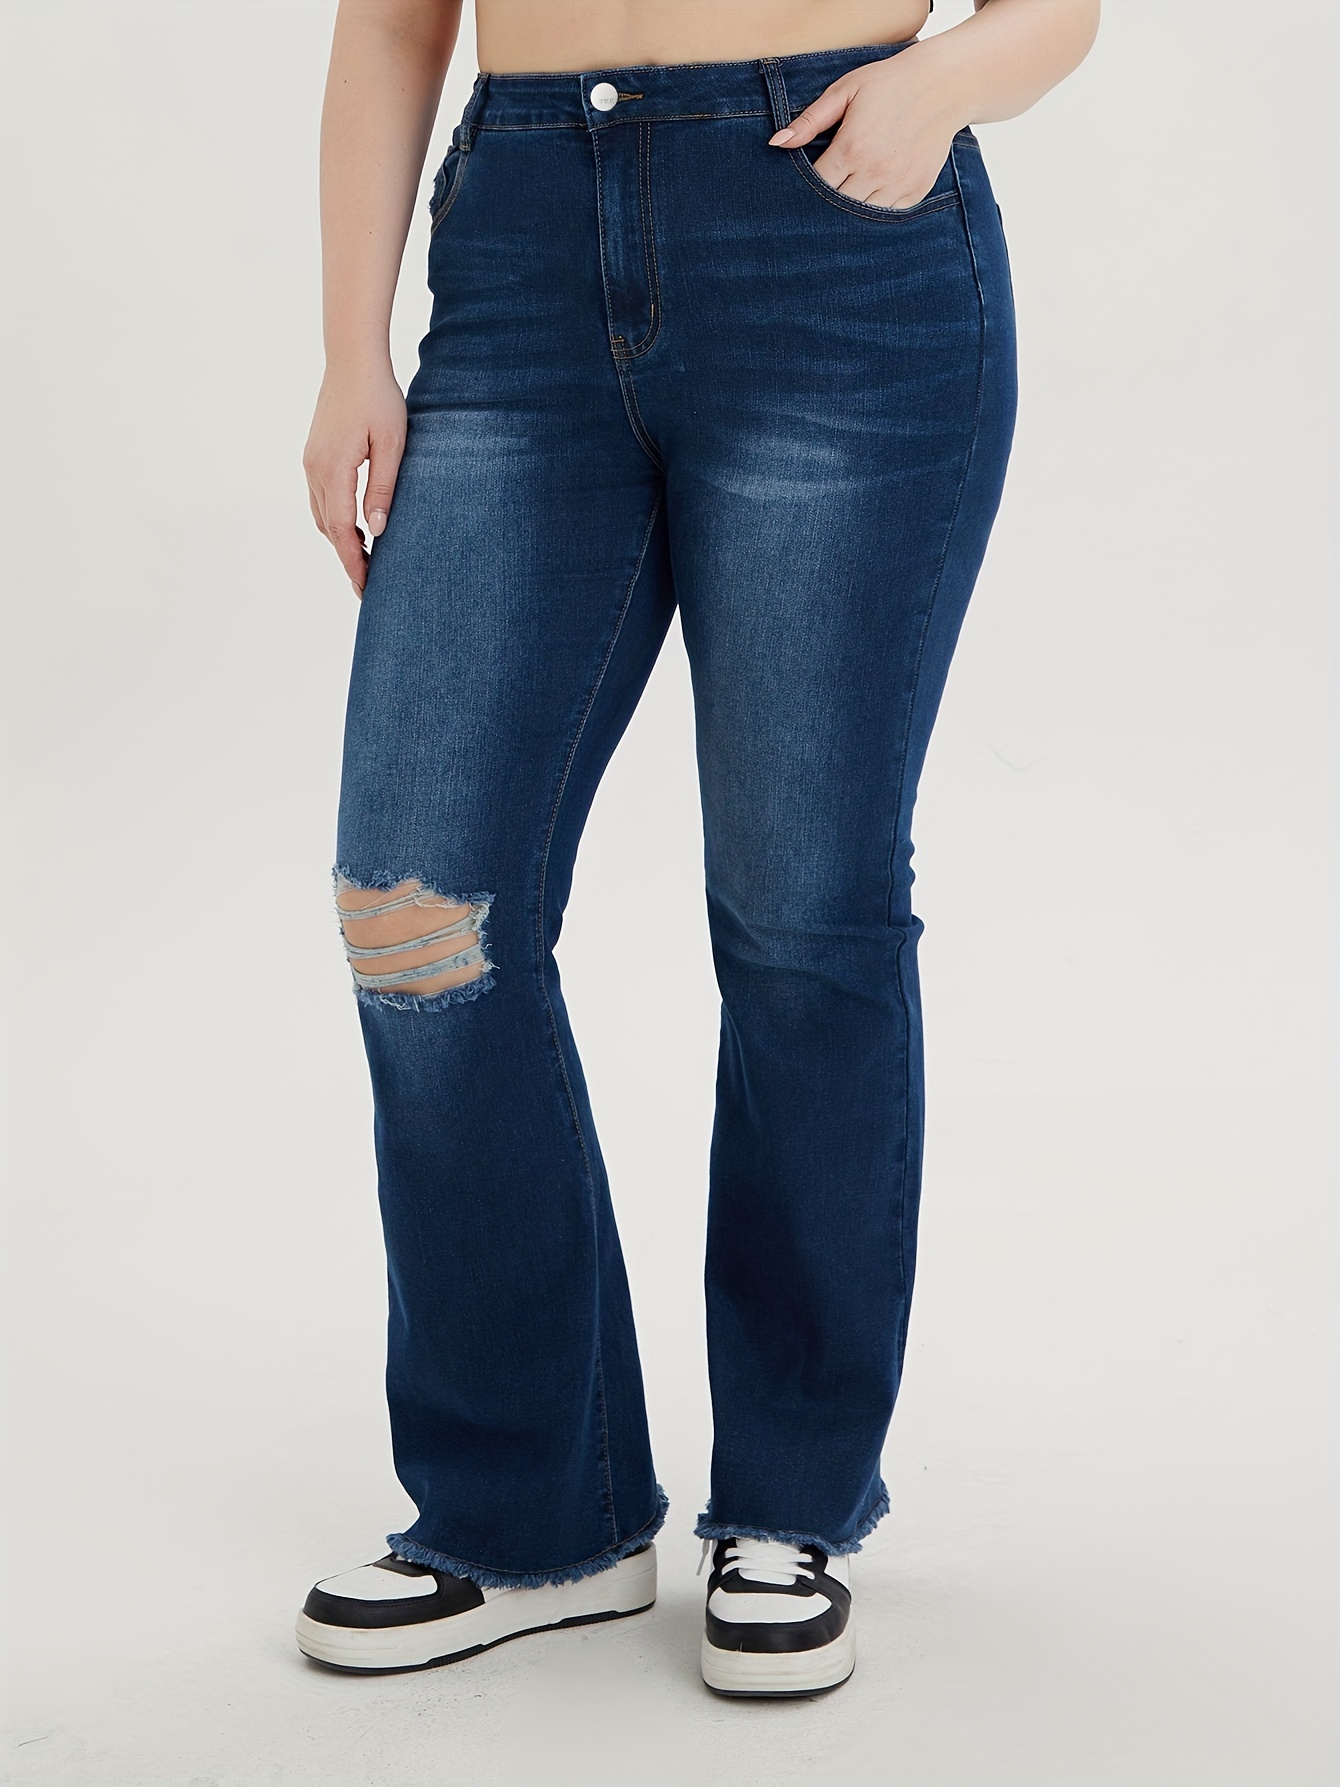 Glozeplus Bell Bottom Jeans for Women High Waisted Skinny Ripped